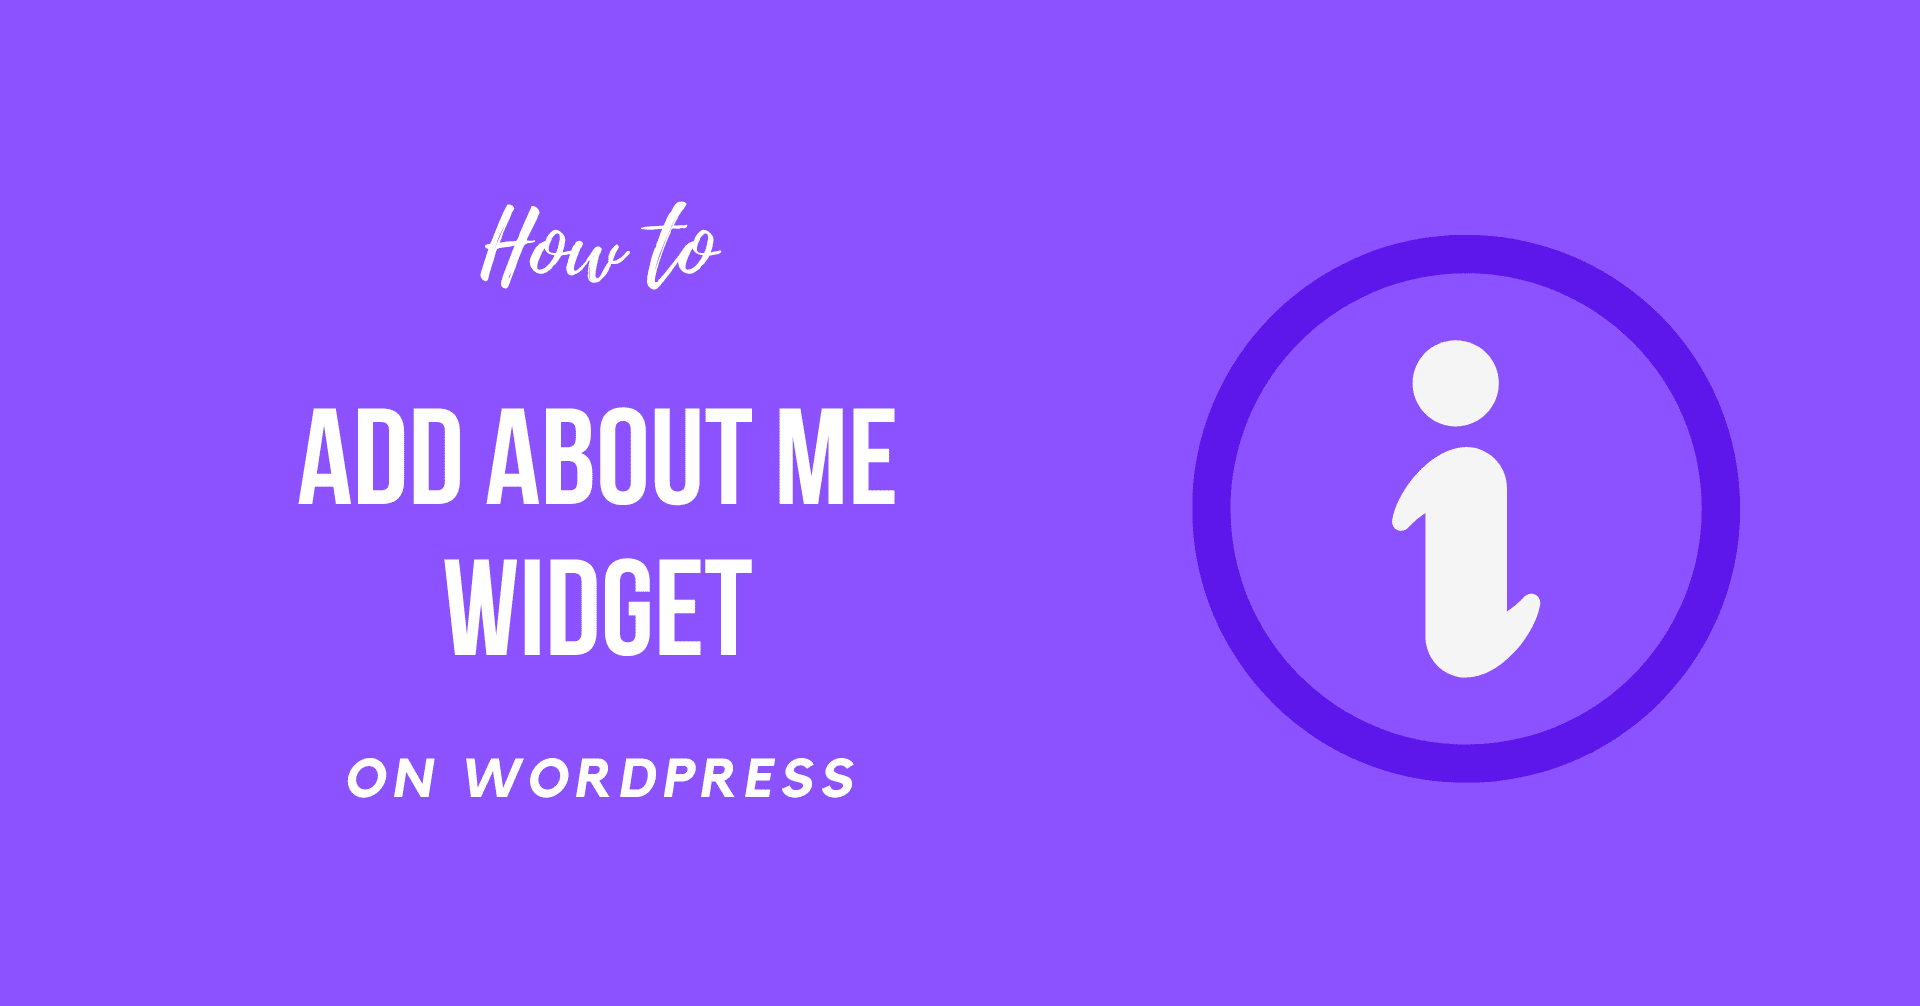 How to Add About Me Widget on WordPress